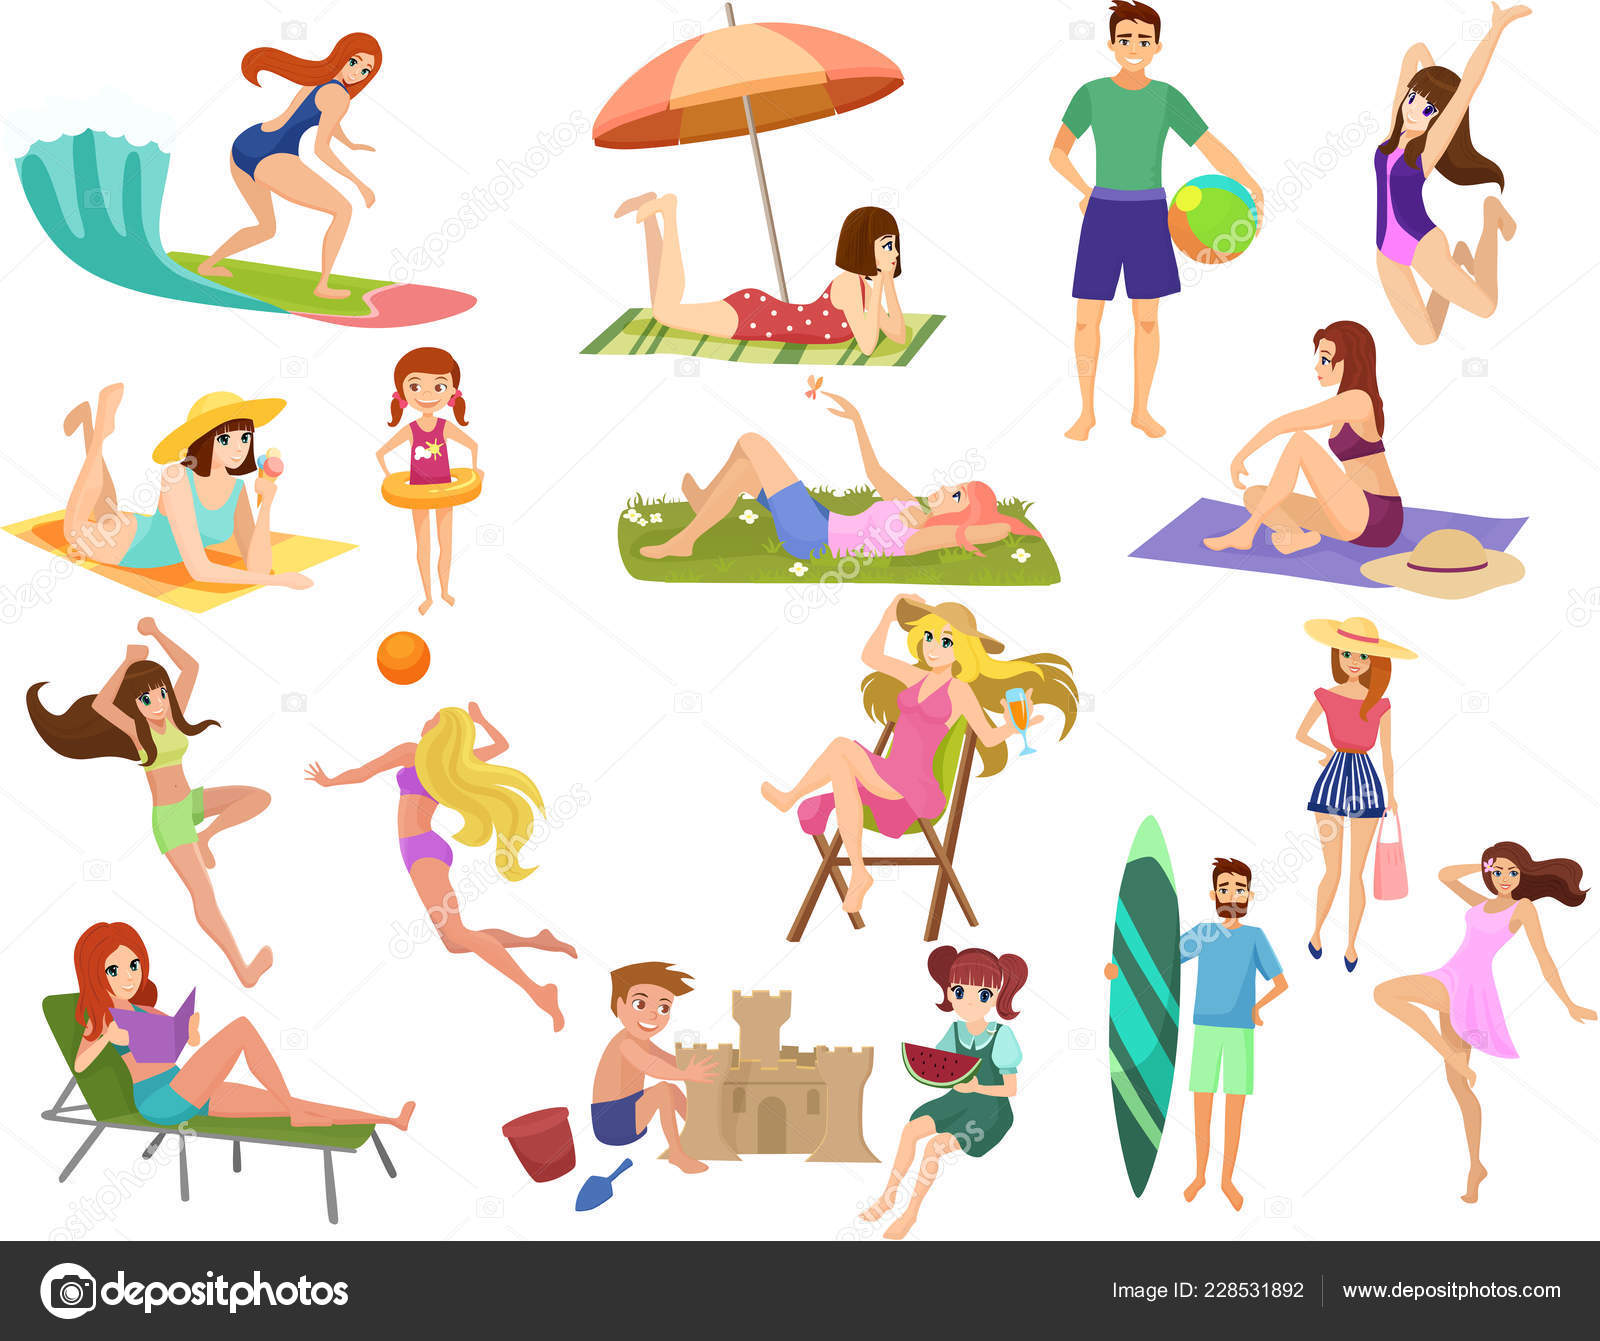 Summer beach cartoon anime vector people outdoor activities man woman and kids sunbathing playingwalking carrying surfboard talking relaxing isolated stock vector image by lembergvector